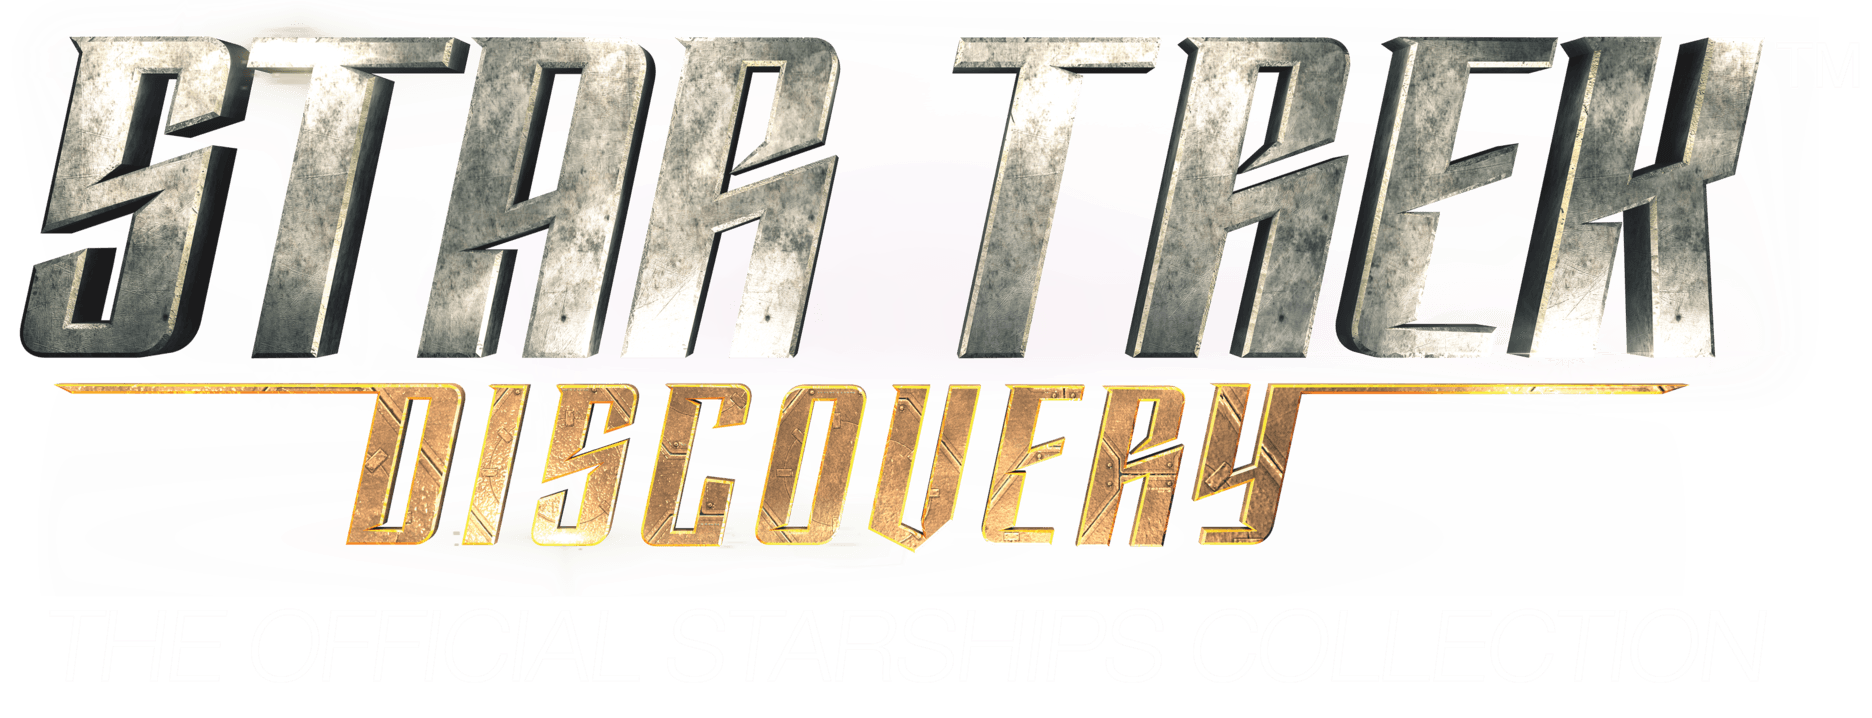 Star Trek: Discovery The Official Starships Collection | Memory